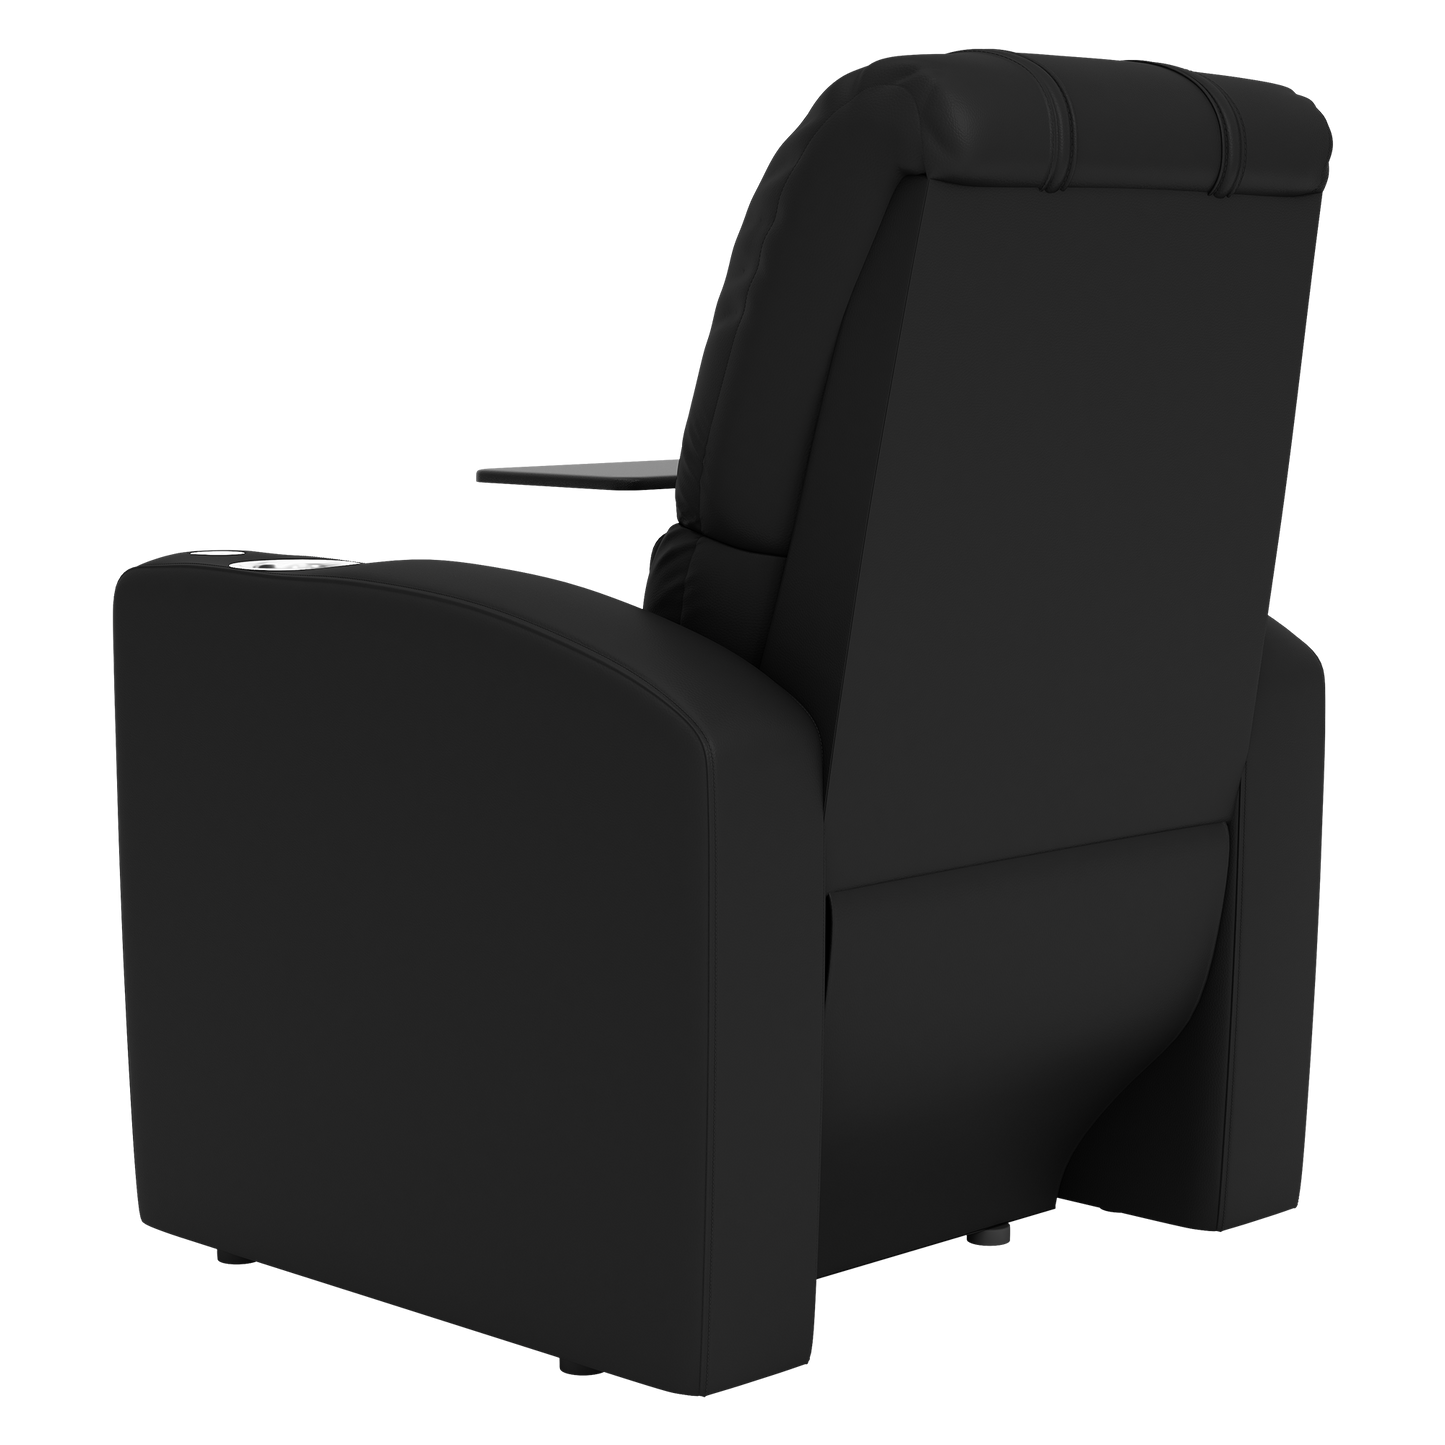 Stealth Power Plus Recliner with Buffalo Bills Secondary Logo